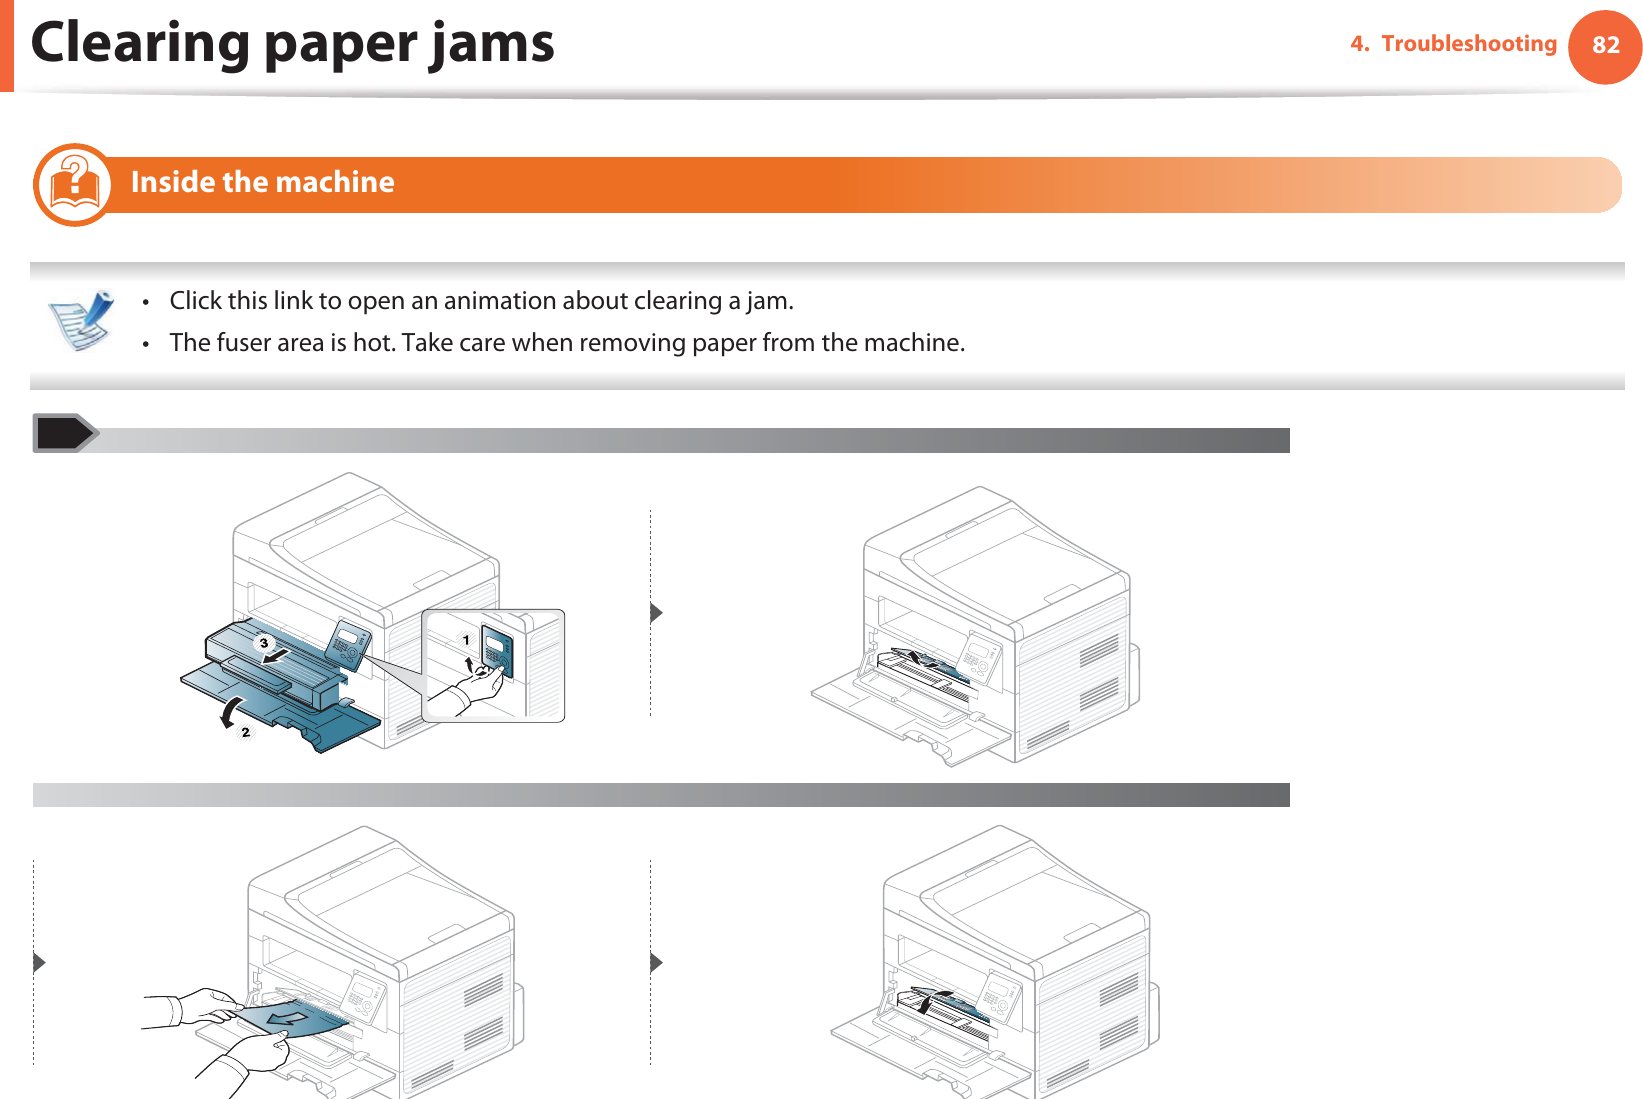 Clearing paper jams 824. Troubleshooting6 Inside the machine • Click this link to open an animation about clearing a jam.• The fuser area is hot. Take care when removing paper from the machine. 